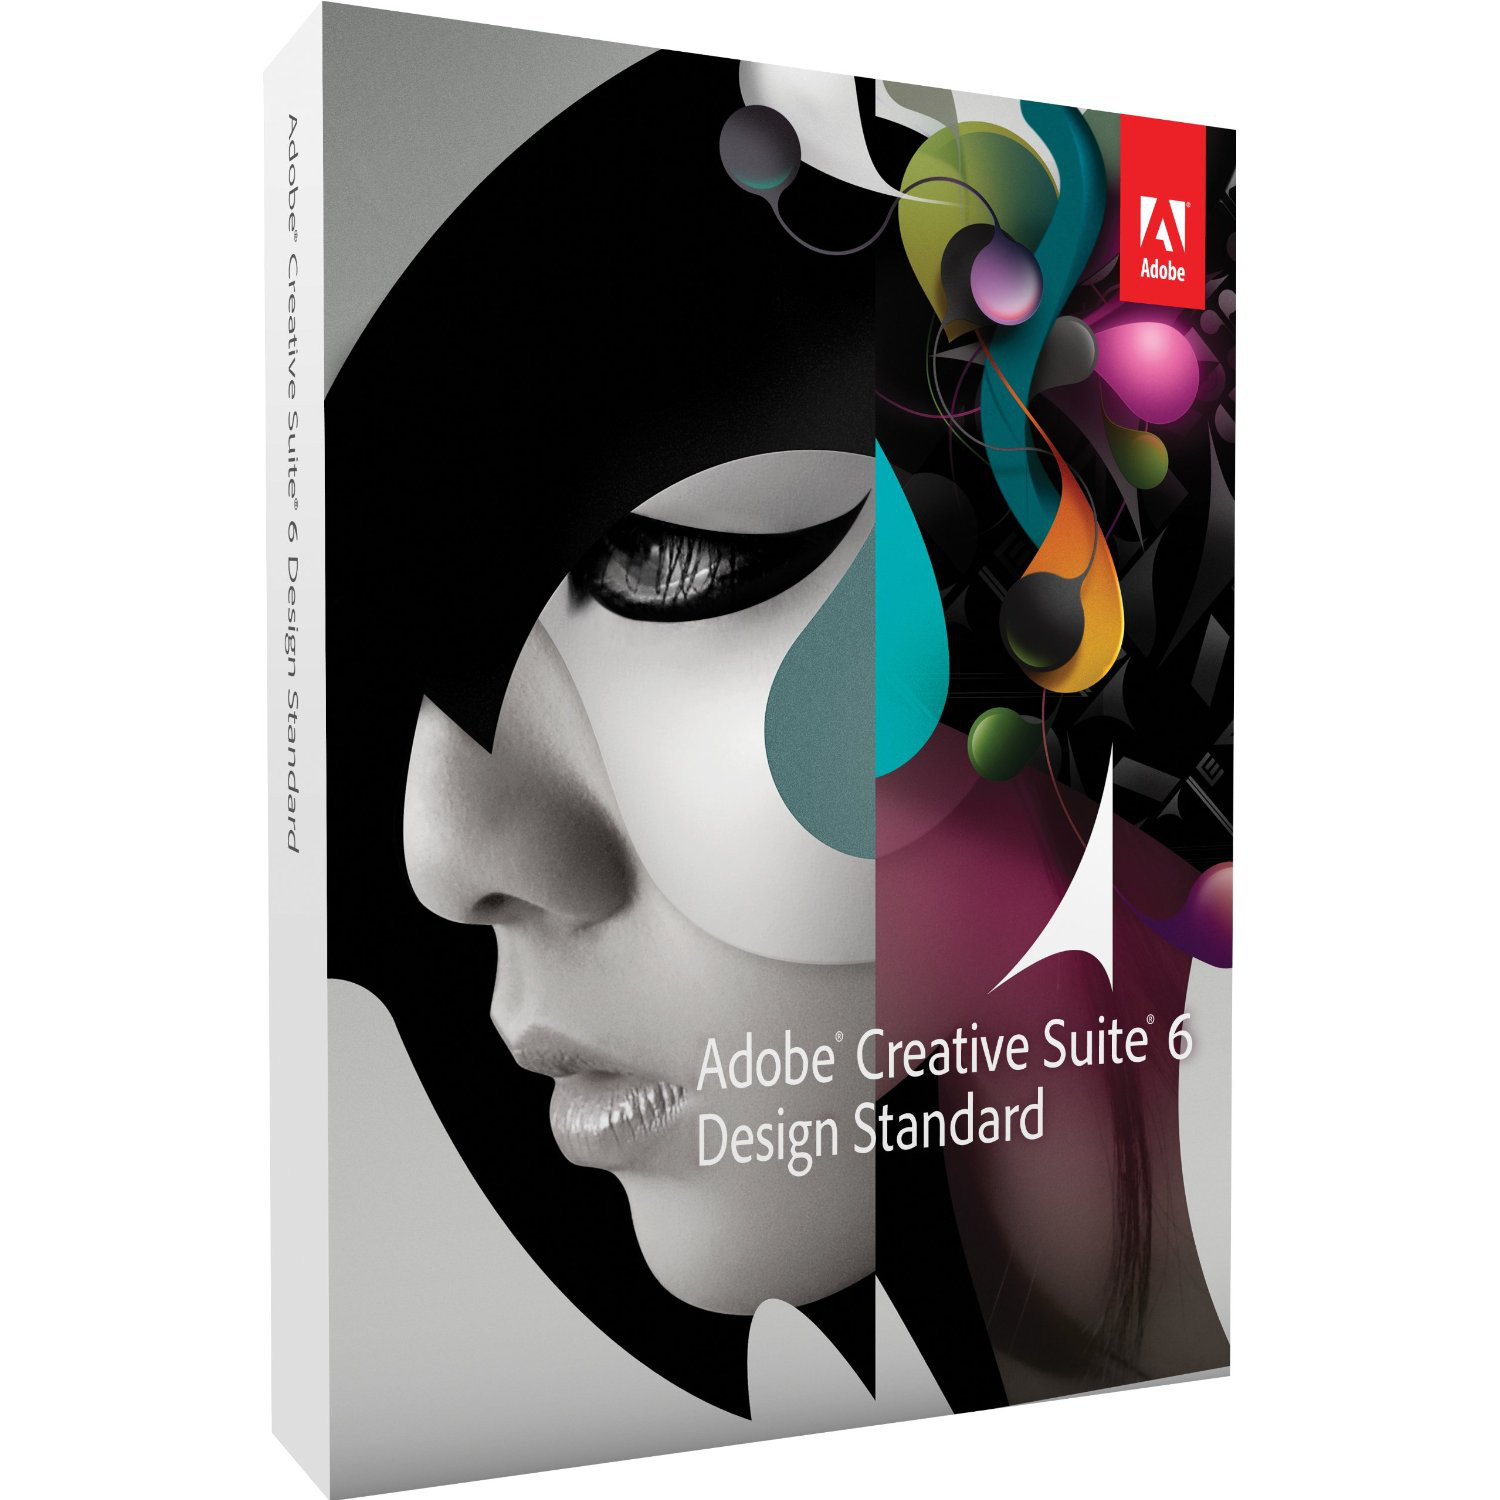 Where to buy Boris Continuum Complete 10 for Adobe AE and PrPro